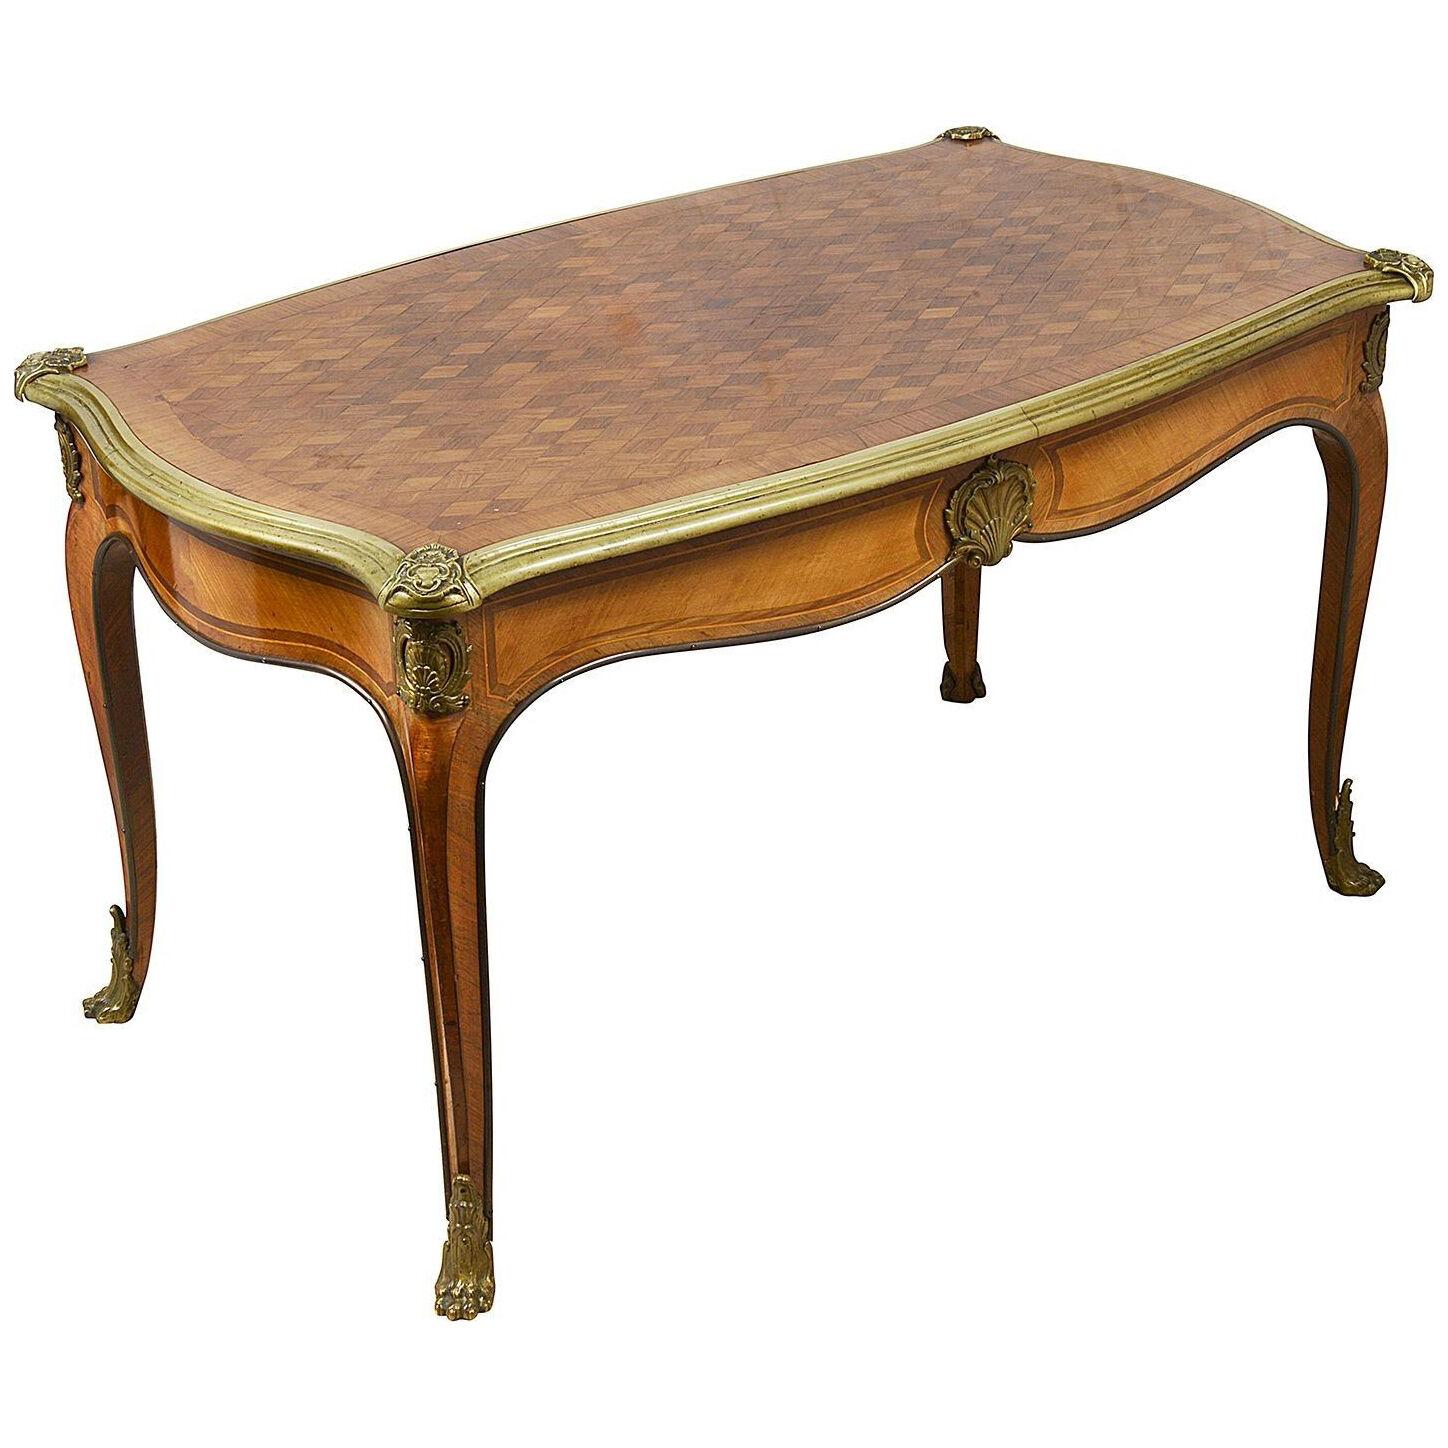 Late 19th Century French parquetry inalid side / coffee table.